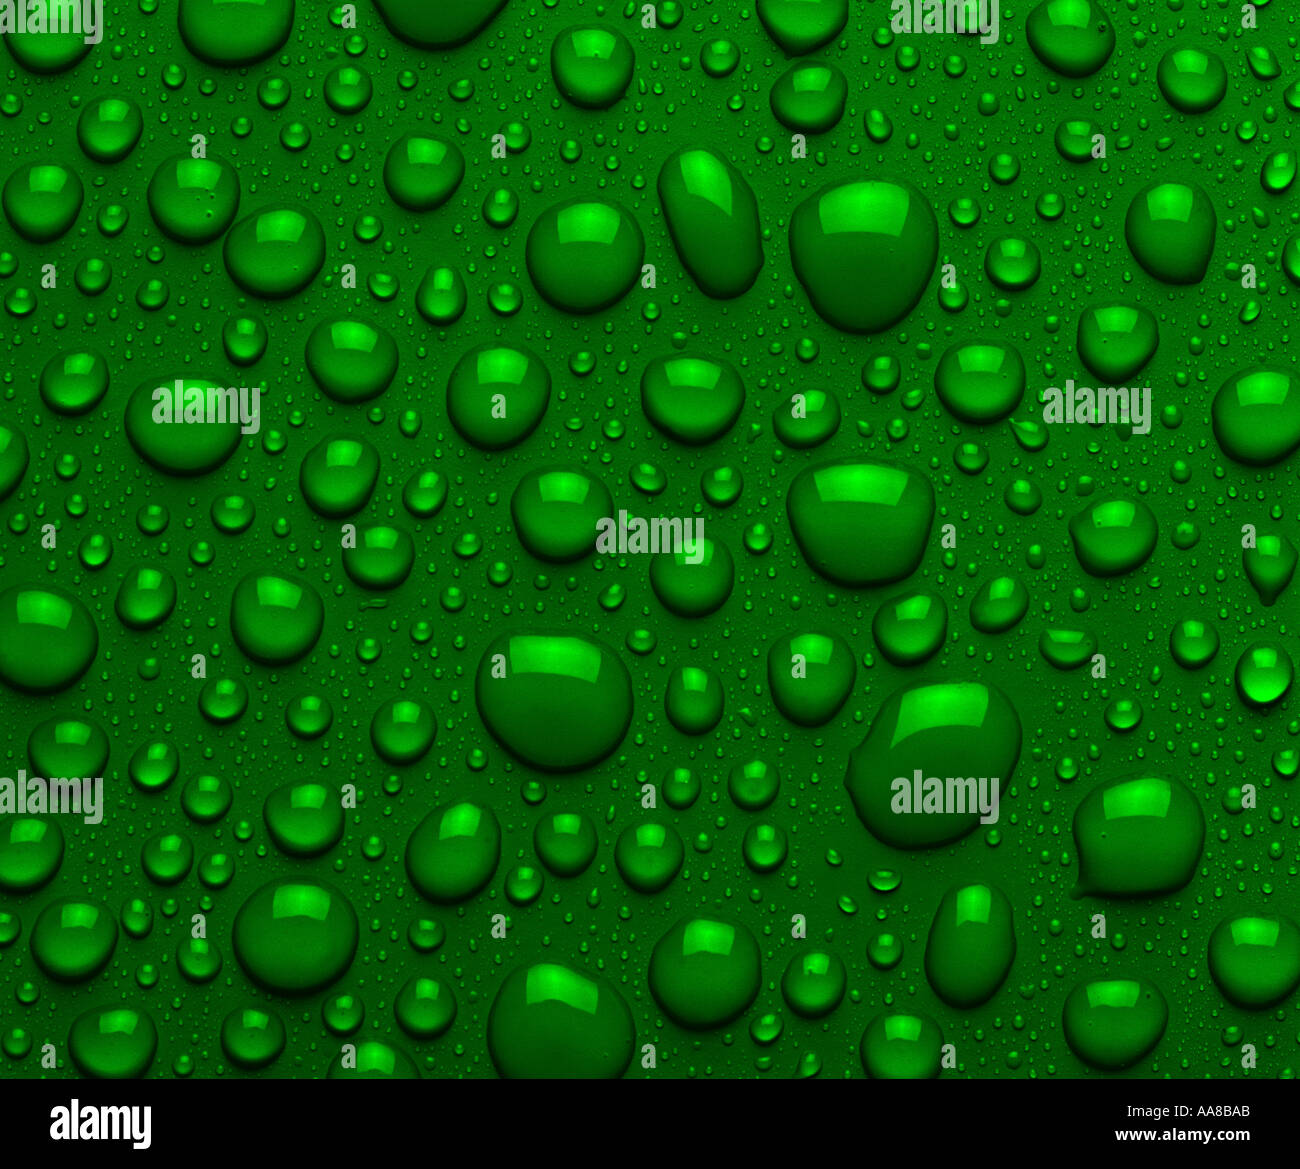 DROPLETS OF GREEN LIQUID ON GREEN SURFACE Stock Photo